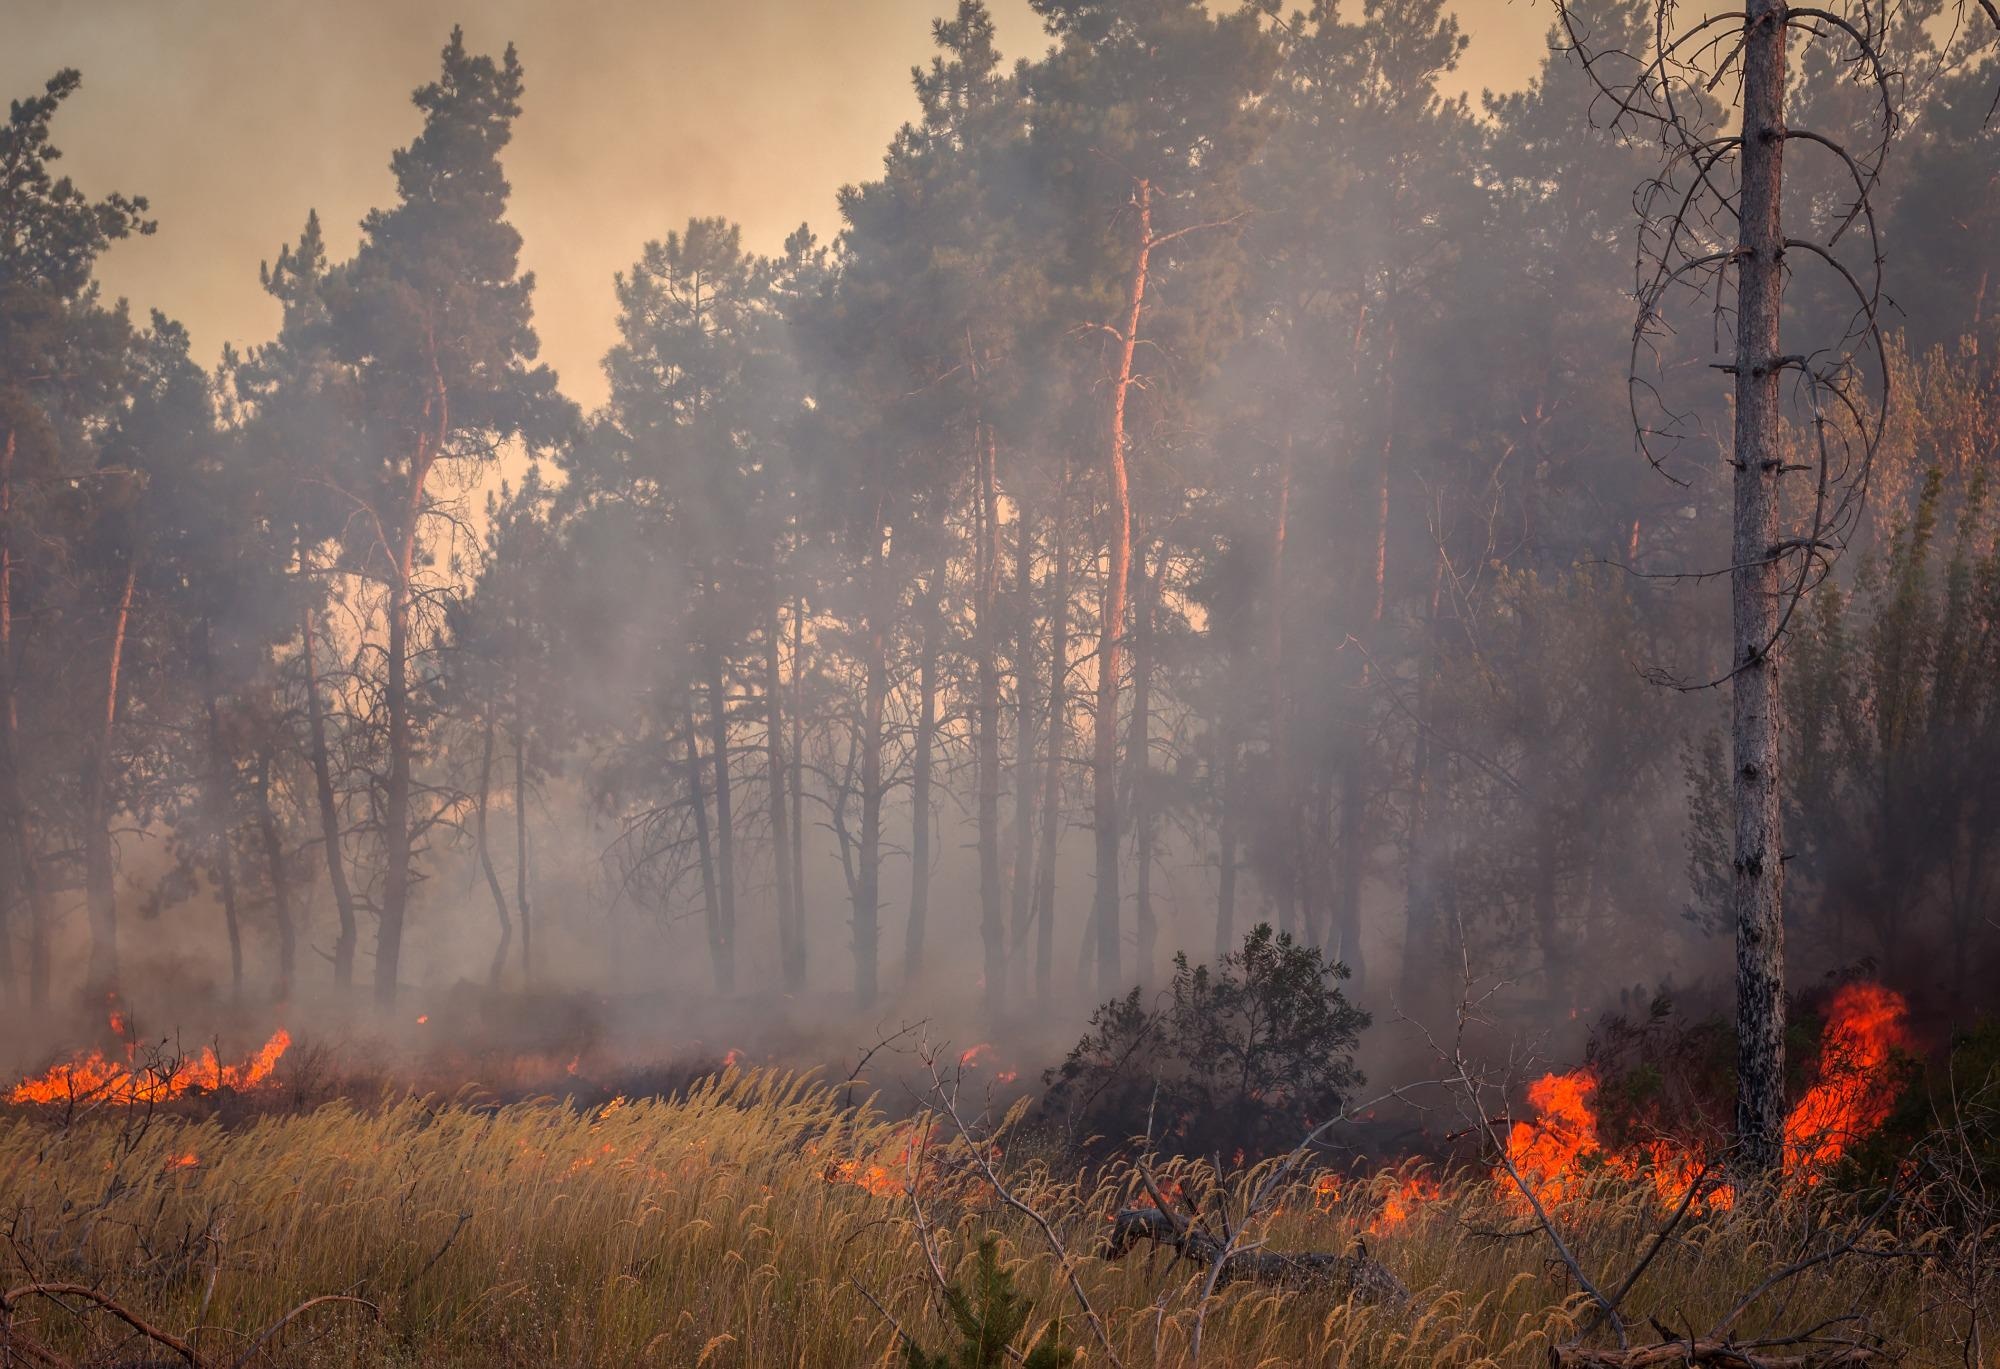 Study Highlights the Climate Risk Posed by Boreal Wildfires and Points to Fire Management as an Effective Way to Limit Emissions.